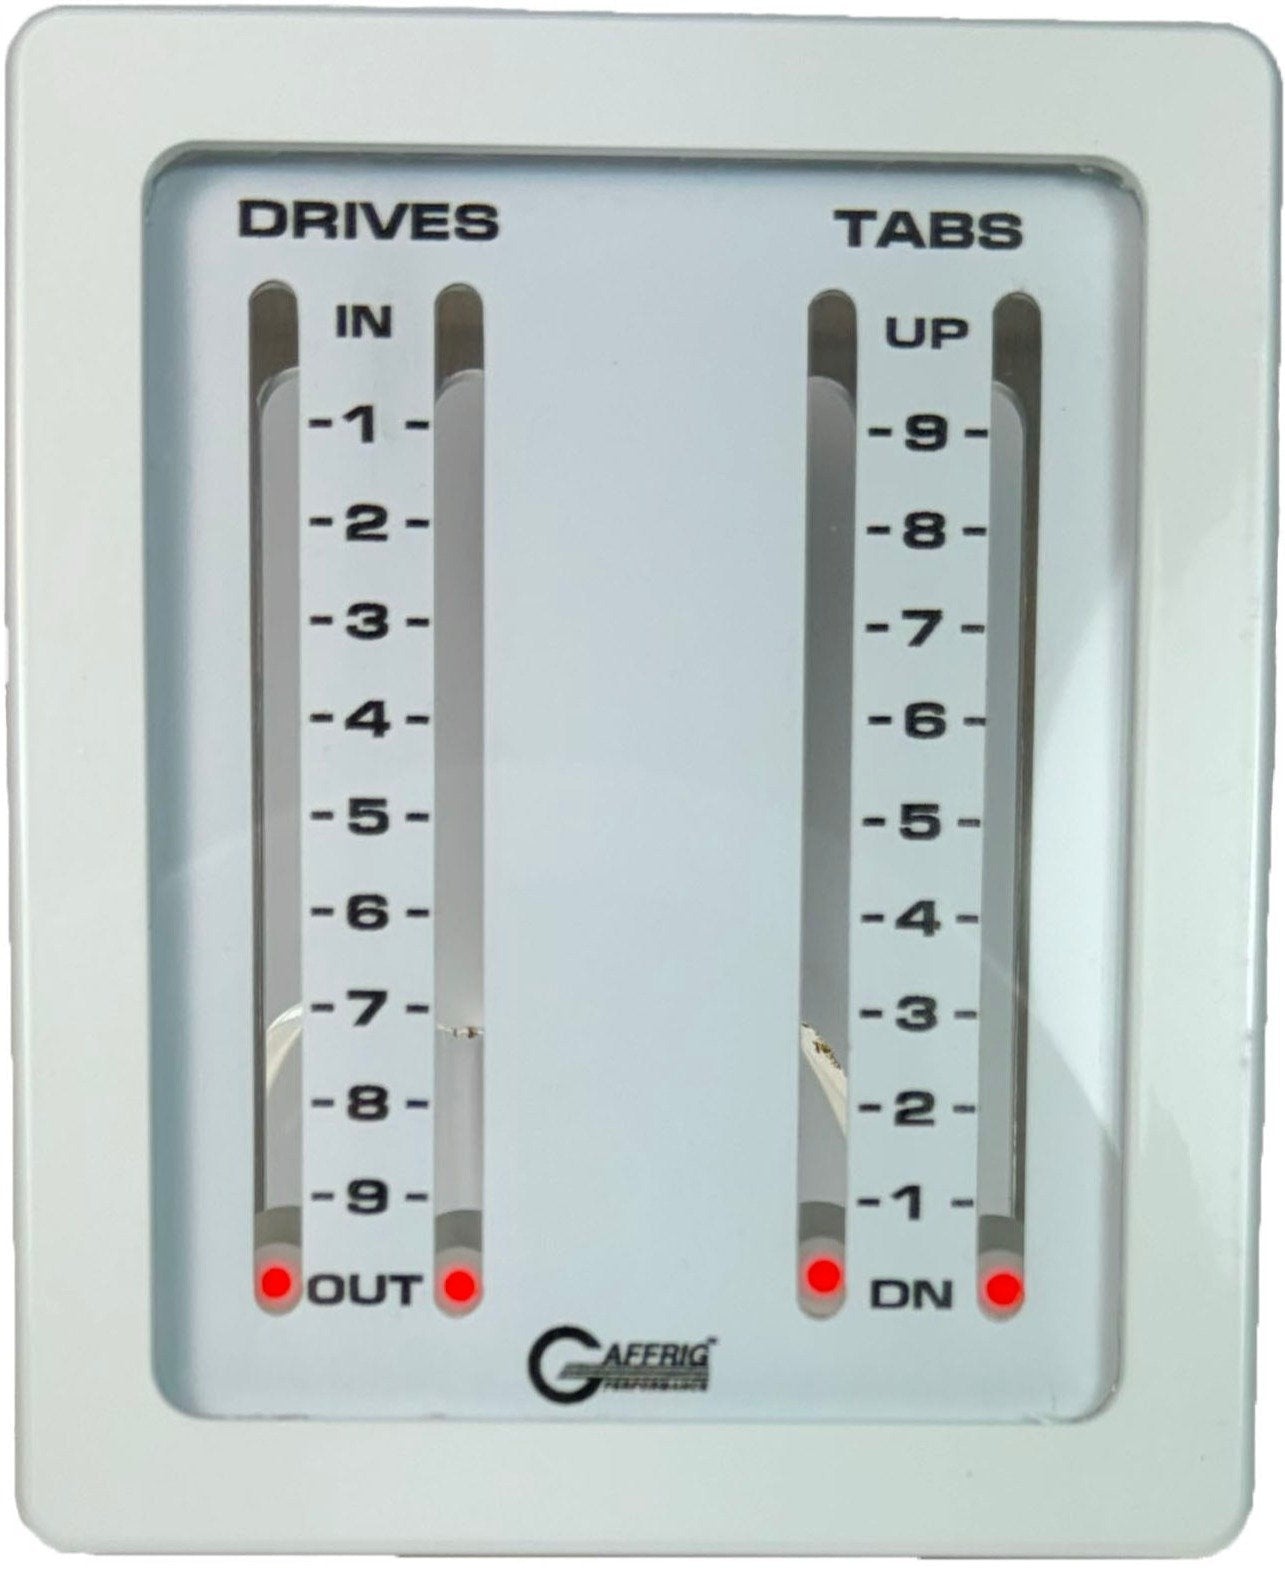 GAFFRIG PART #205 MECHANICAL INDICATOR, 2 DRIVES/2 TABS, MERCURY- CARD - WHITE DIAL WHITE